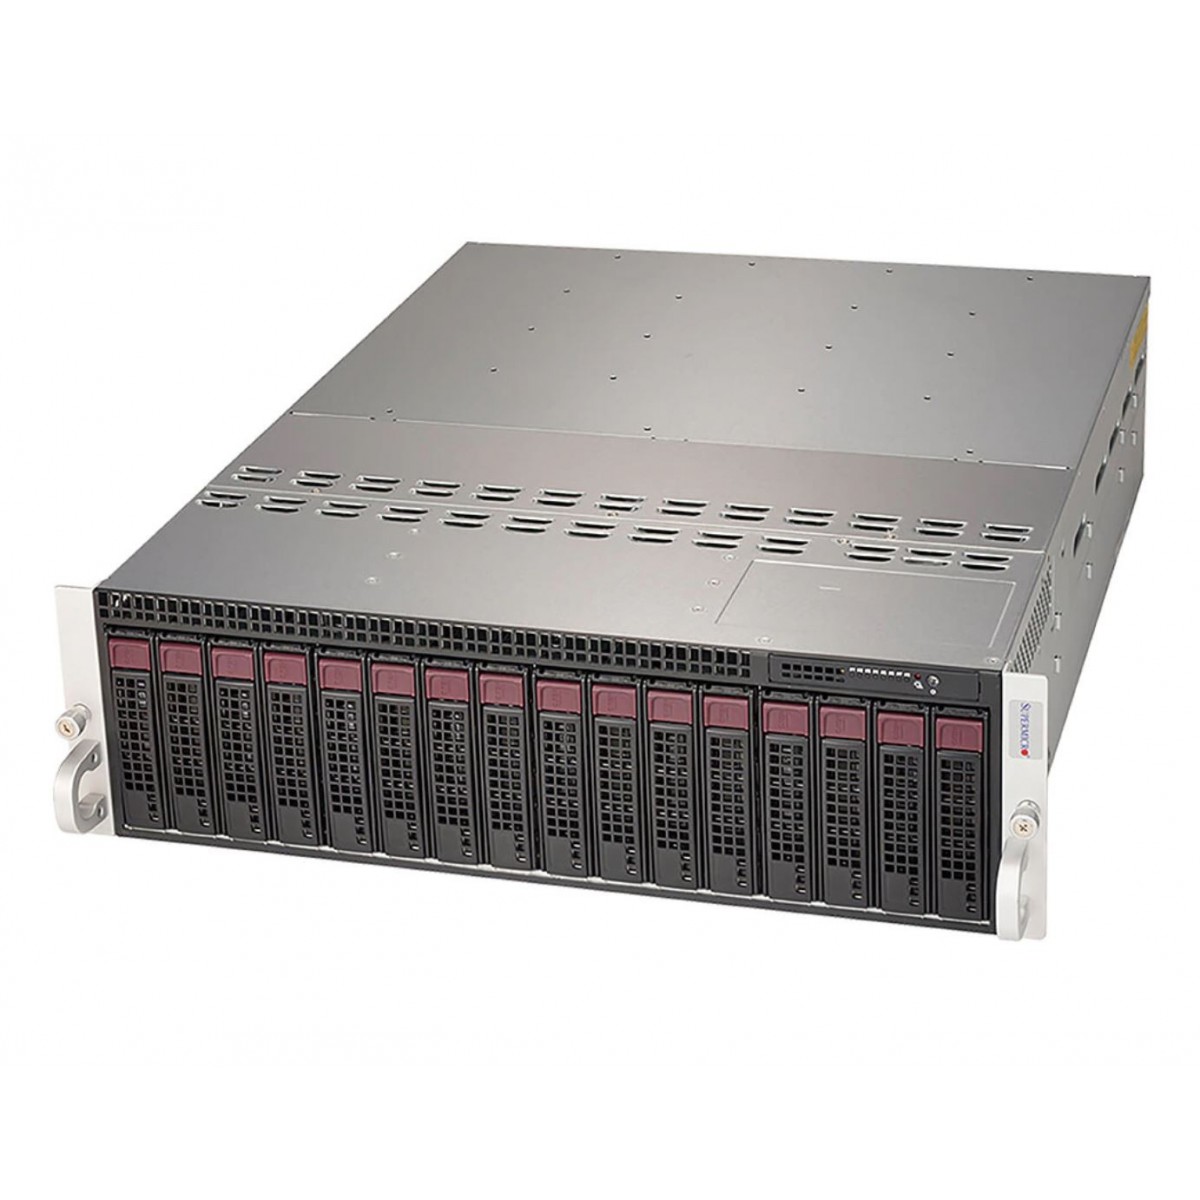 Supermicro Barebone SuperServer SYS-530MT-H8TNR - Complete System only